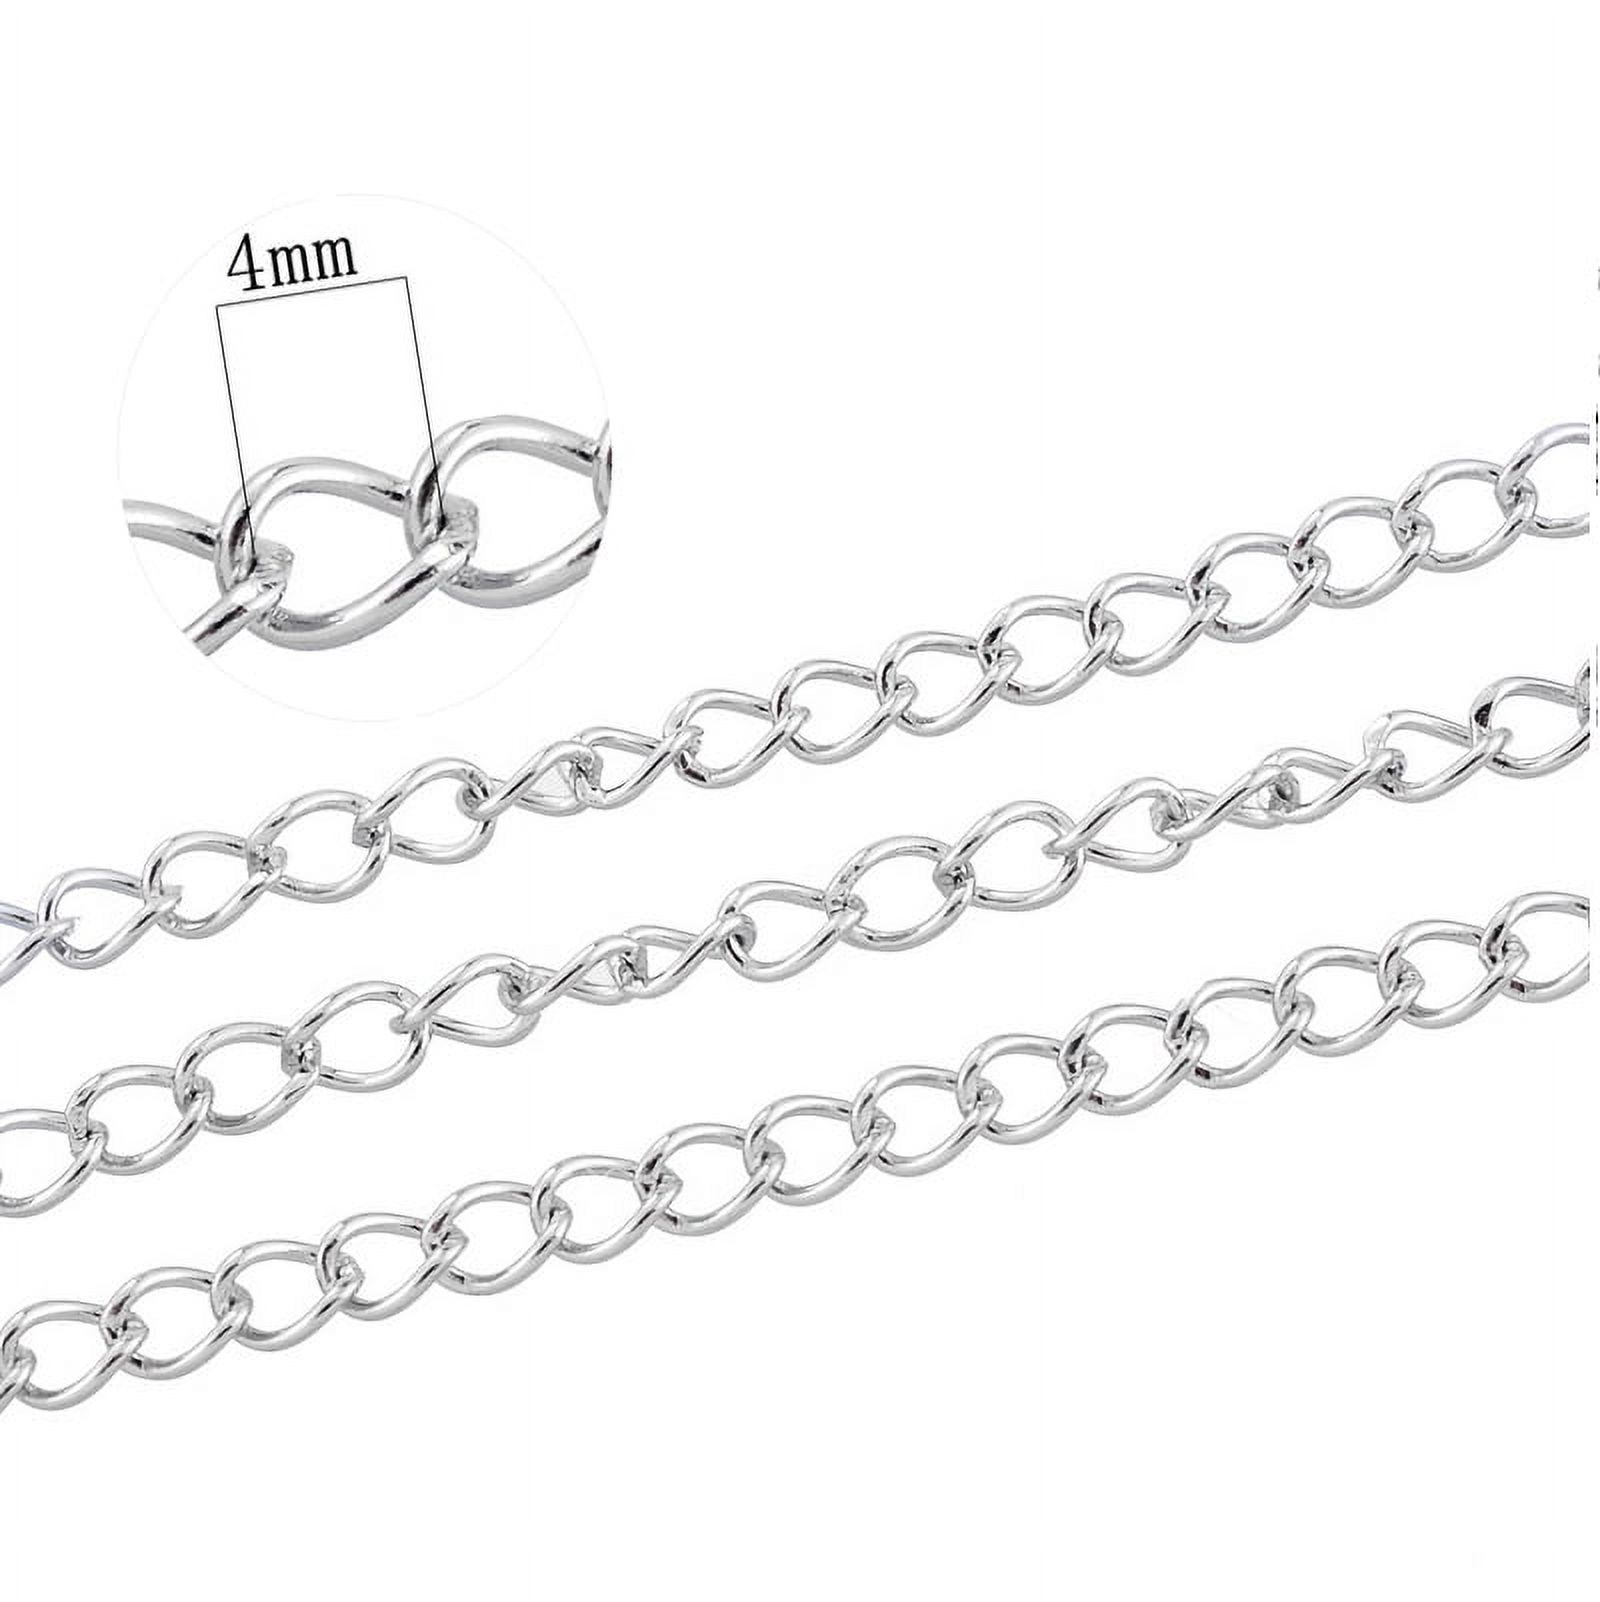 6.56ft Stainless Steel Cable Curb Chain Necklace Jewelry Making supplies  4mm x 3mm 